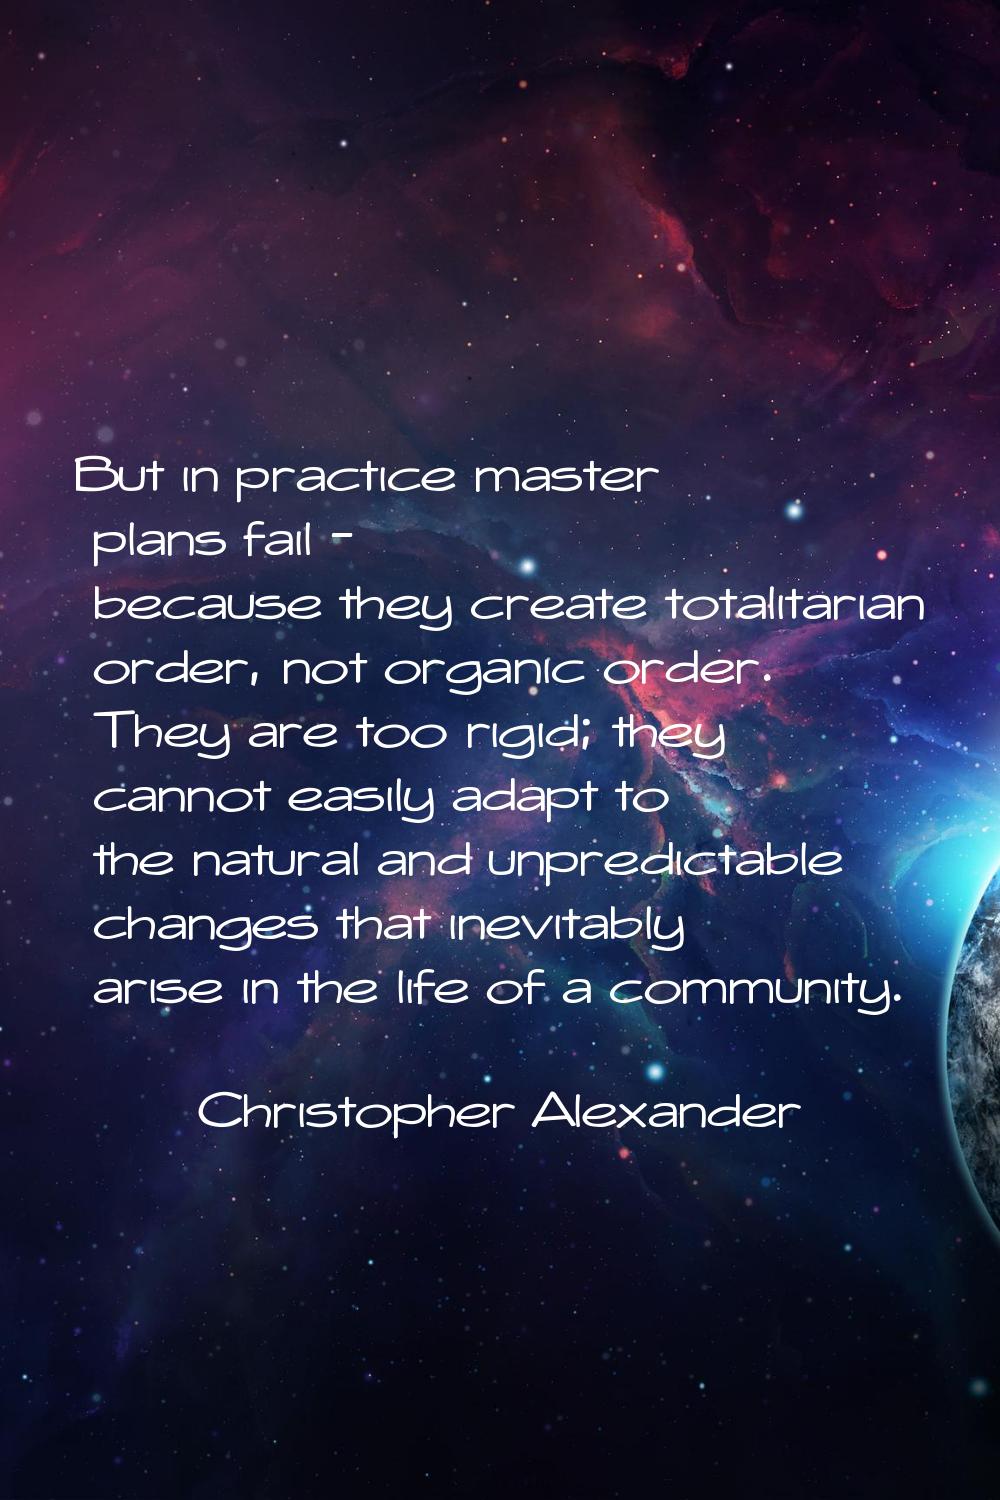 But in practice master plans fail - because they create totalitarian order, not organic order. They